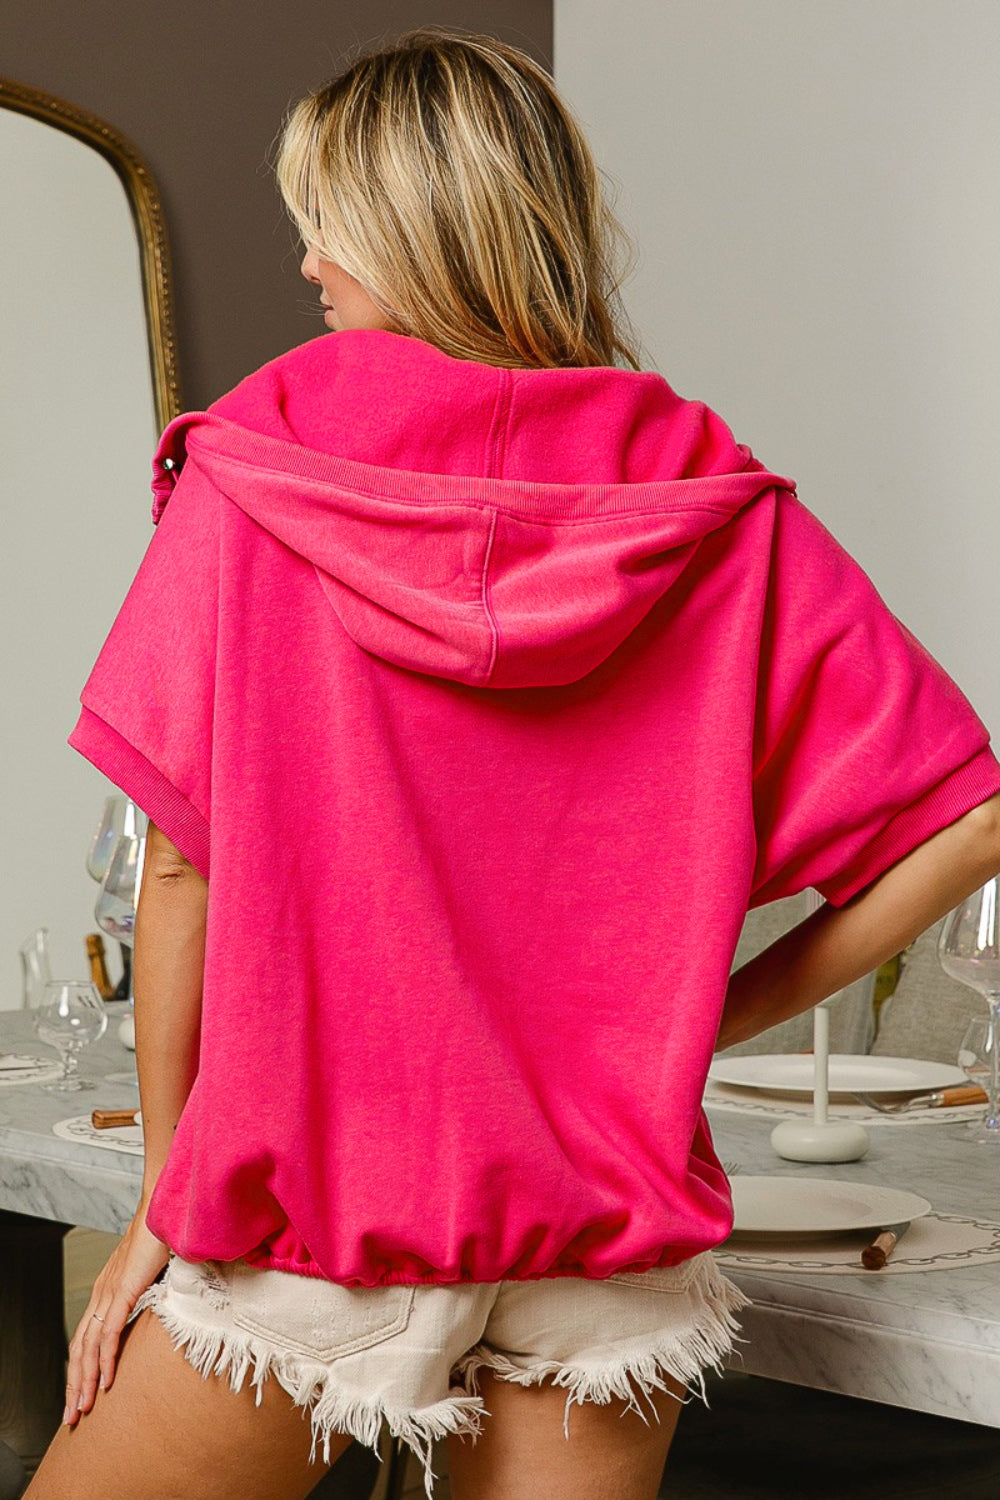 A woman models a vibrant pink short sleeve half zip up French Terry hoodie, with the hood draped elegantly over her wavy blonde hair. She stands in a stylish room, looking off to the side, with the zipper slightly open to give a relaxed vibe. The hoodie features a kangaroo pocket, adding a casual touch to the chic and sporty look.